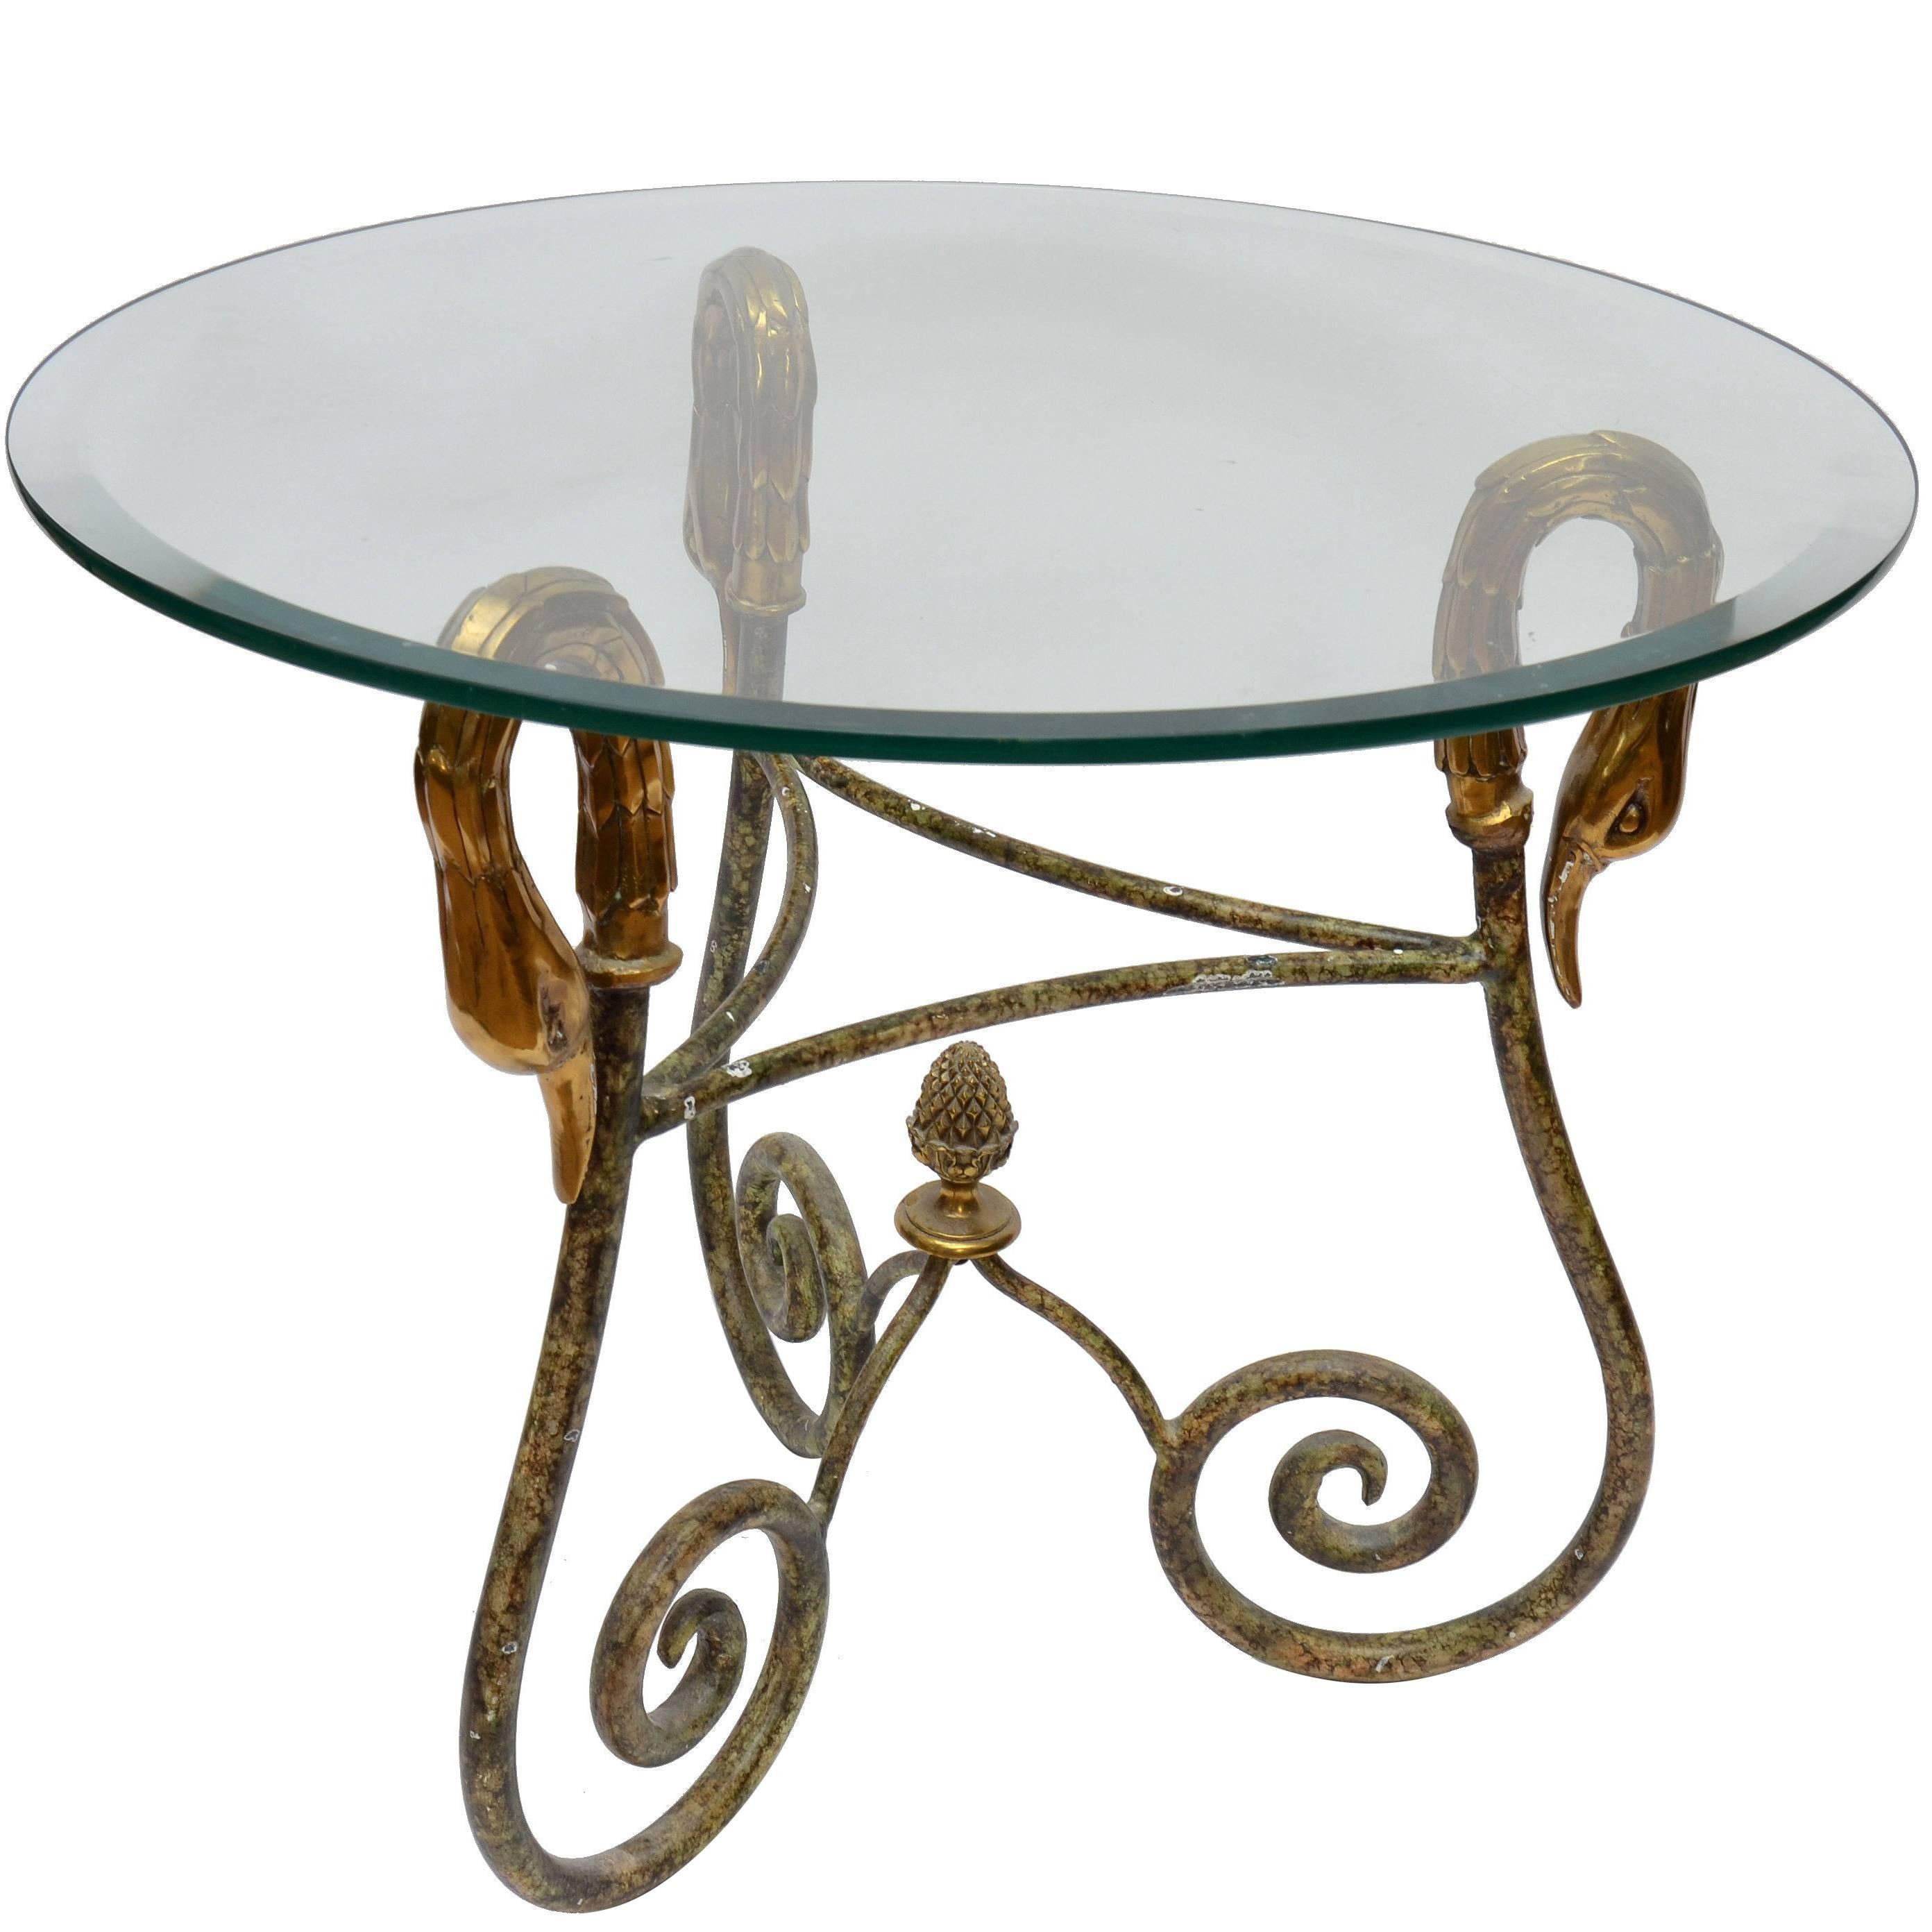 Hollywood Regency Wrought Iron Side Table from Italy with Brass Swan Heads 1950 For Sale